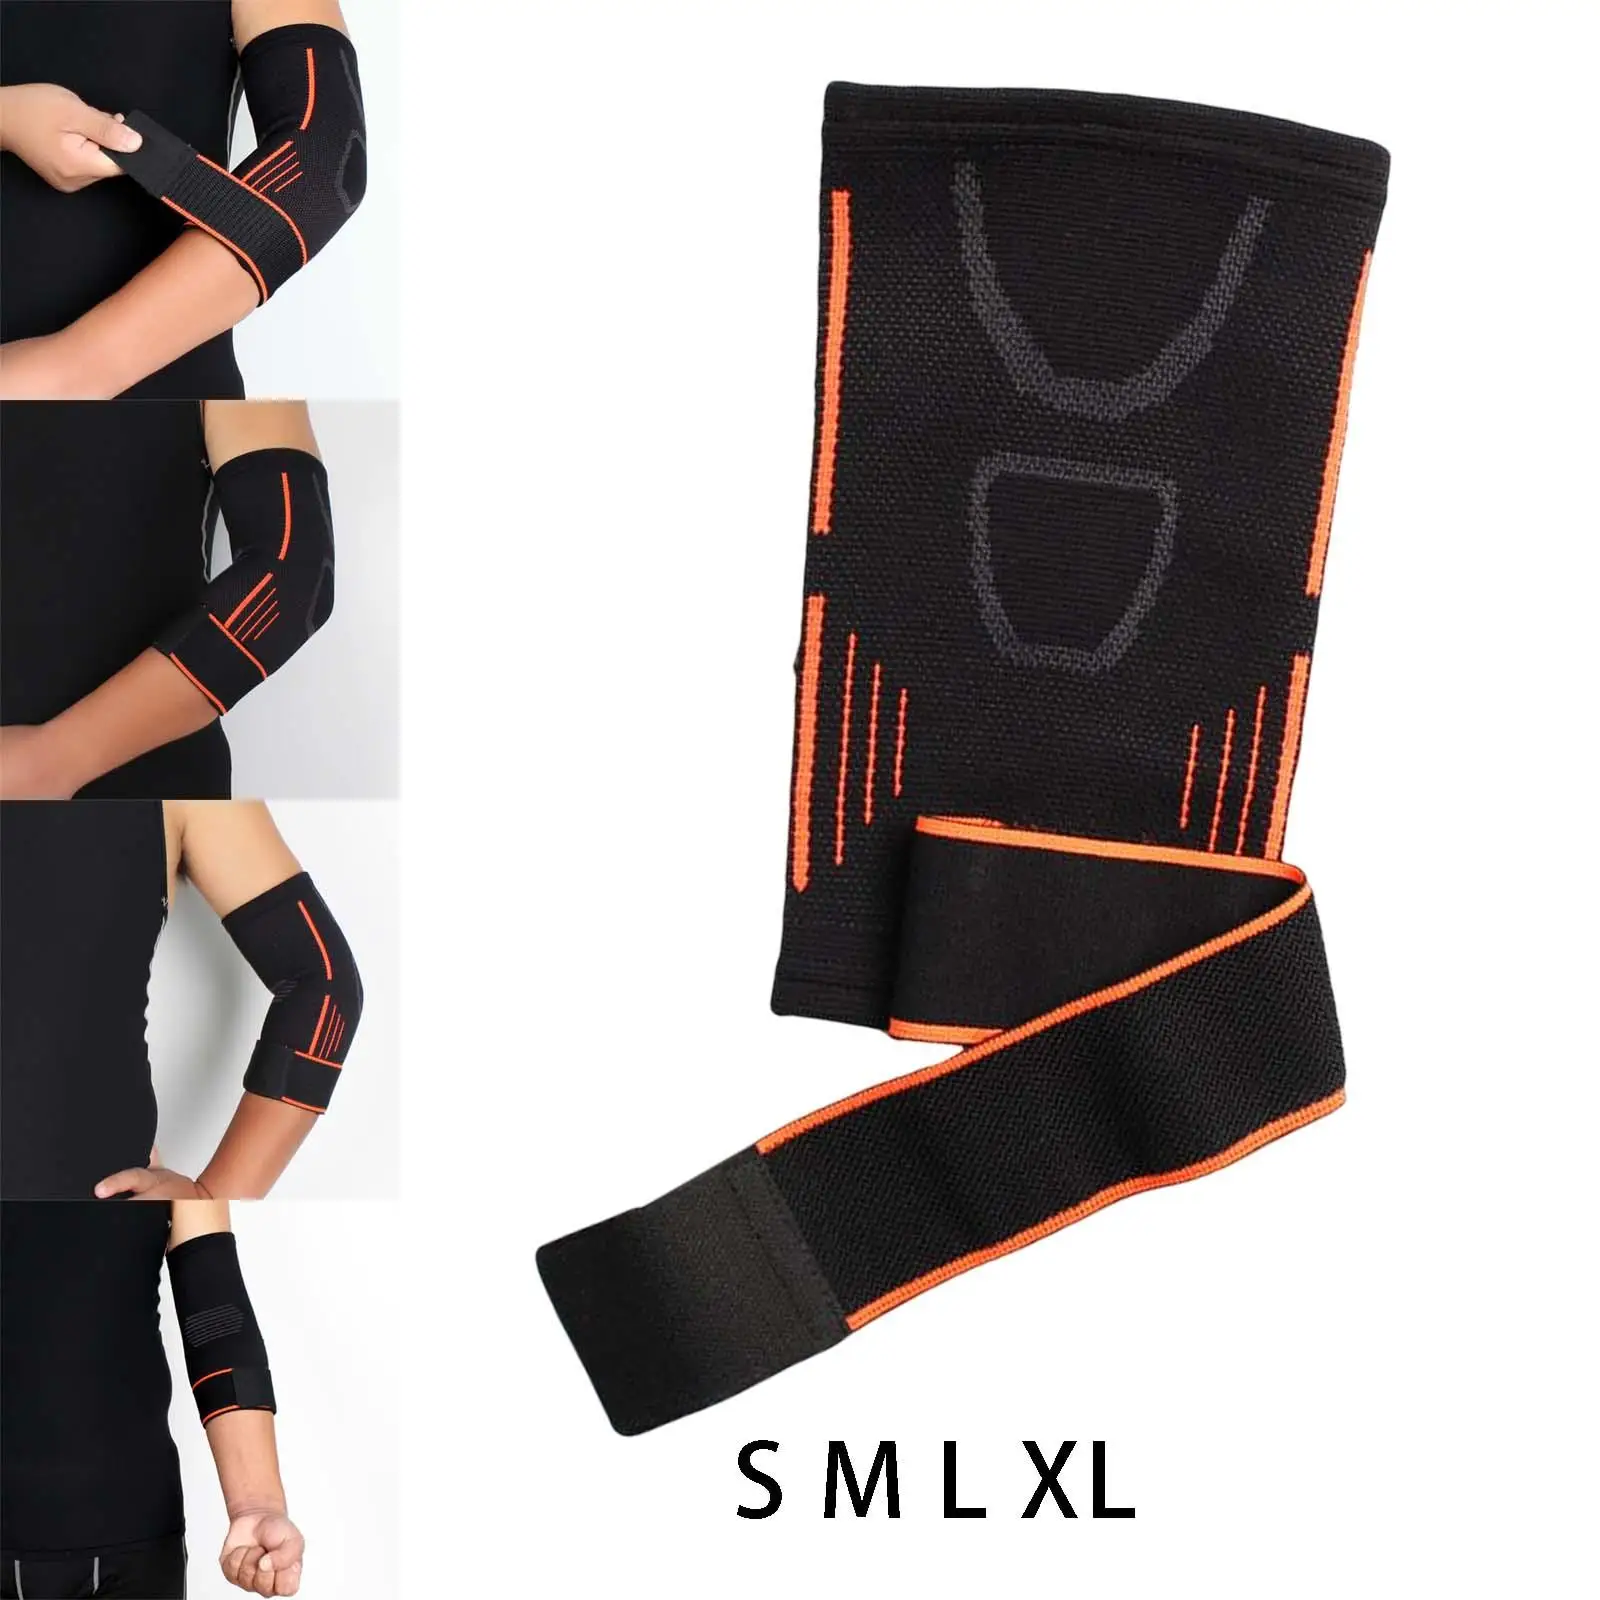 Elastic Elbow Brace Arms Support Wrap Breathable Protector Nylon Compression Sleeve for Tennis Adult Workout Skating Youth